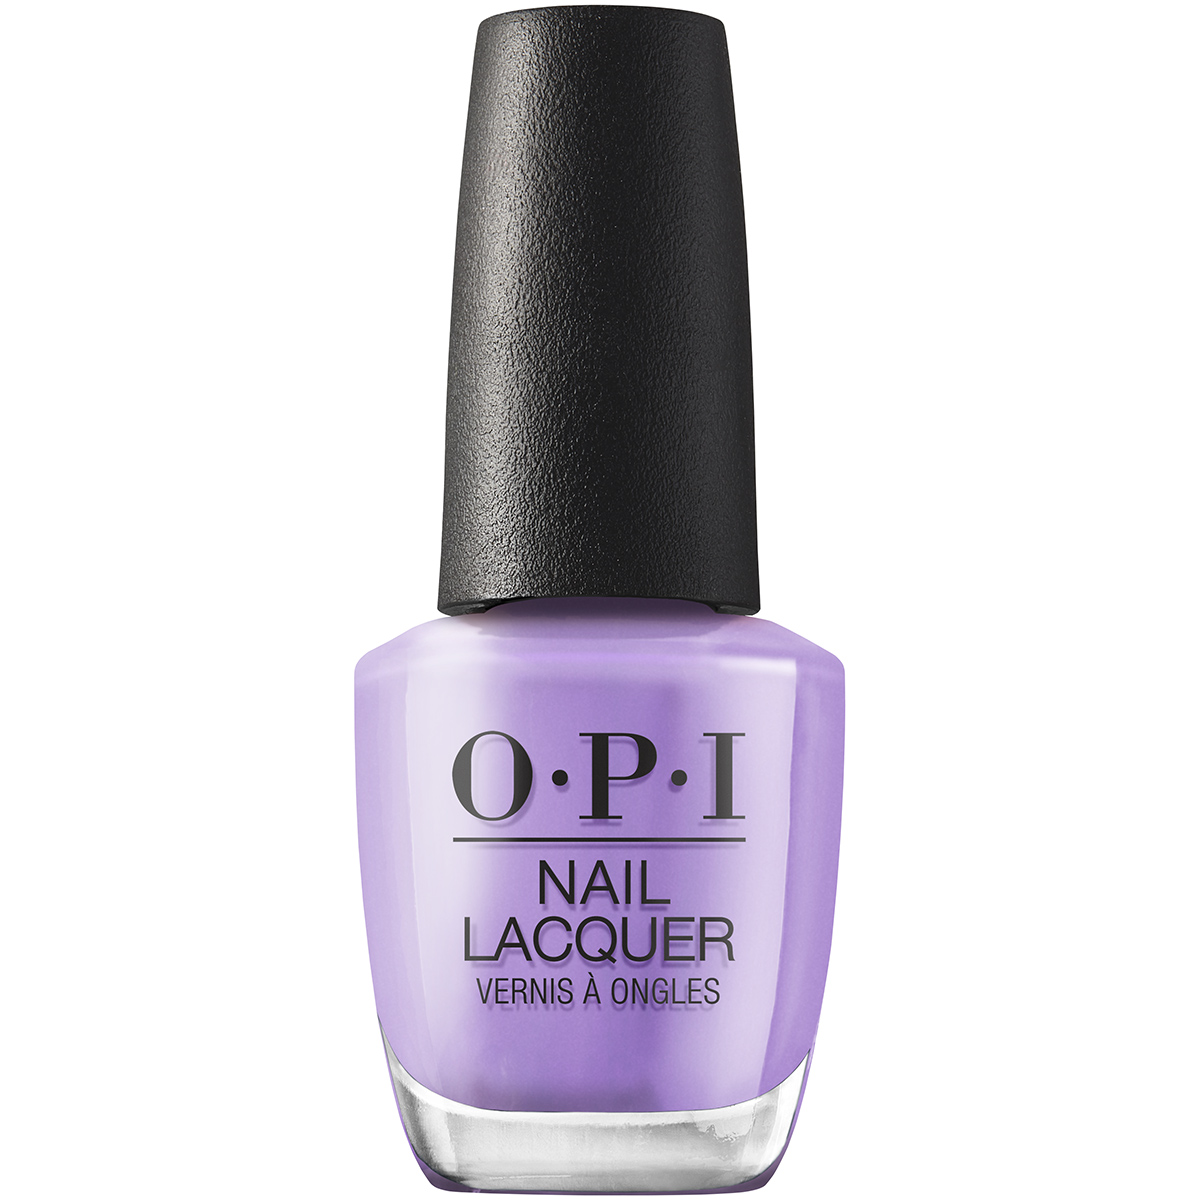 Lac de unghii Nail Lacquer Summer, Skate to the Party, 15 ml, Opi